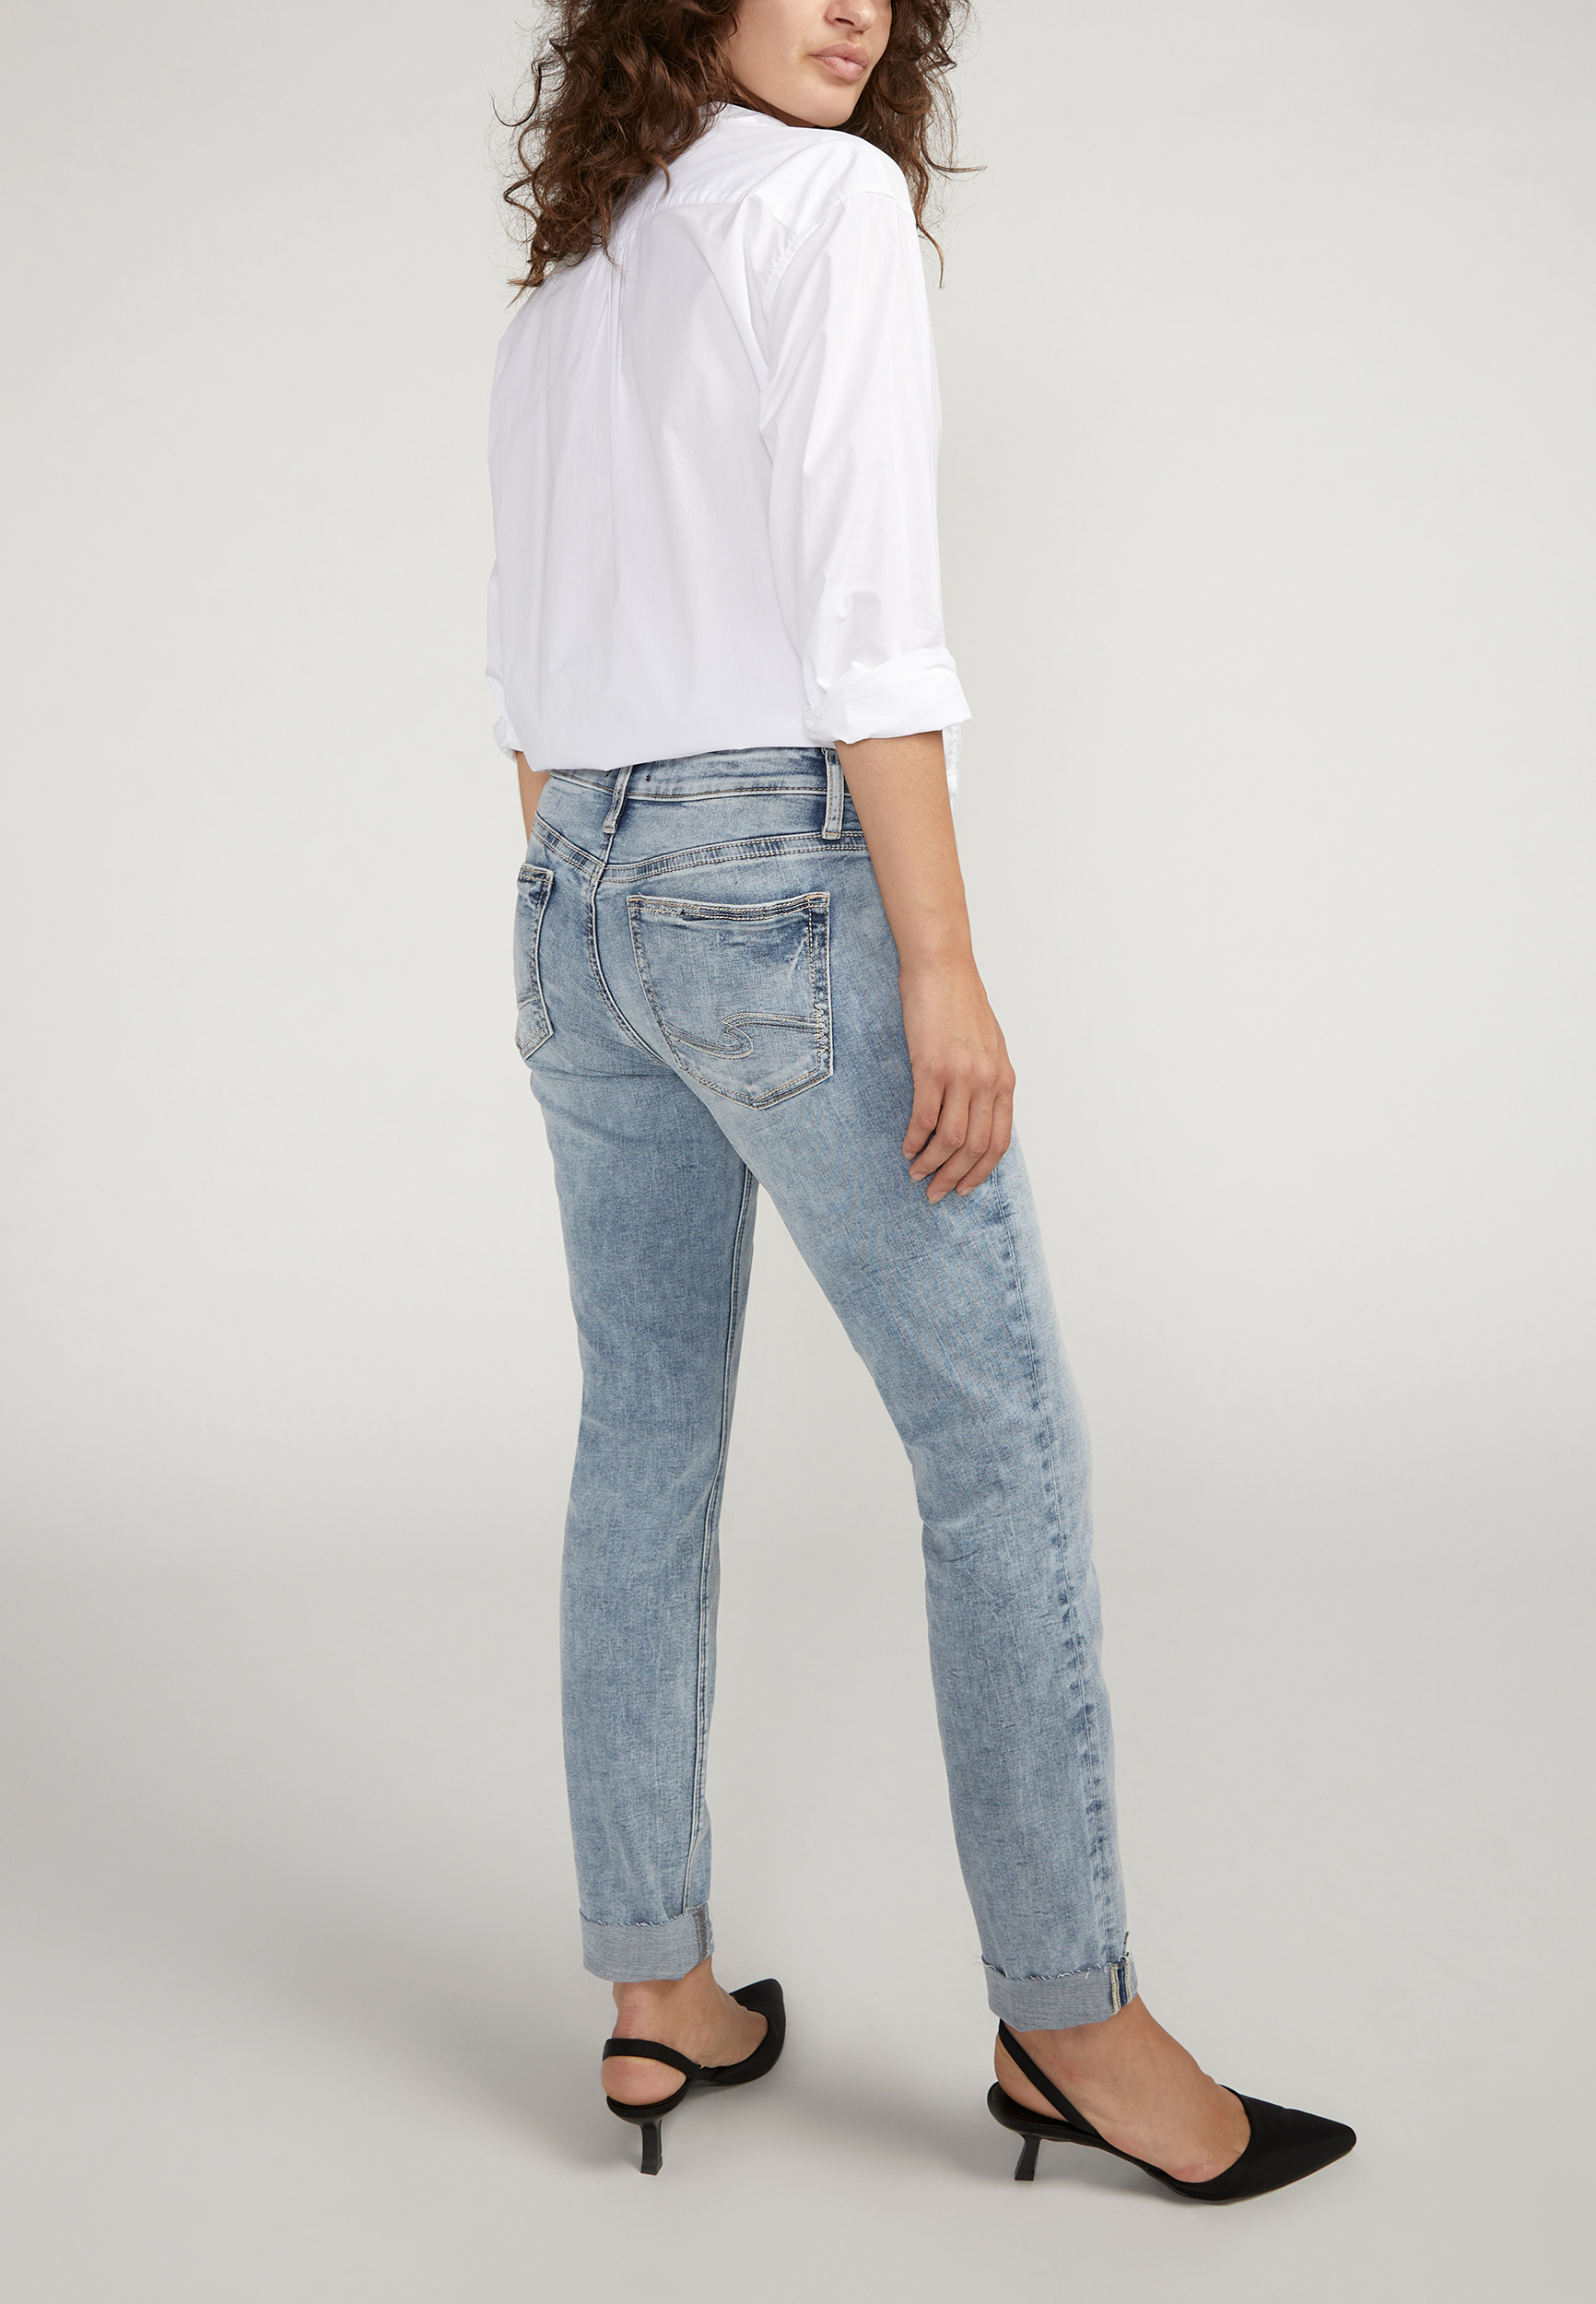 Silver Jeans Co . Highly Desira ble Trouser Jea ns - RCS309 